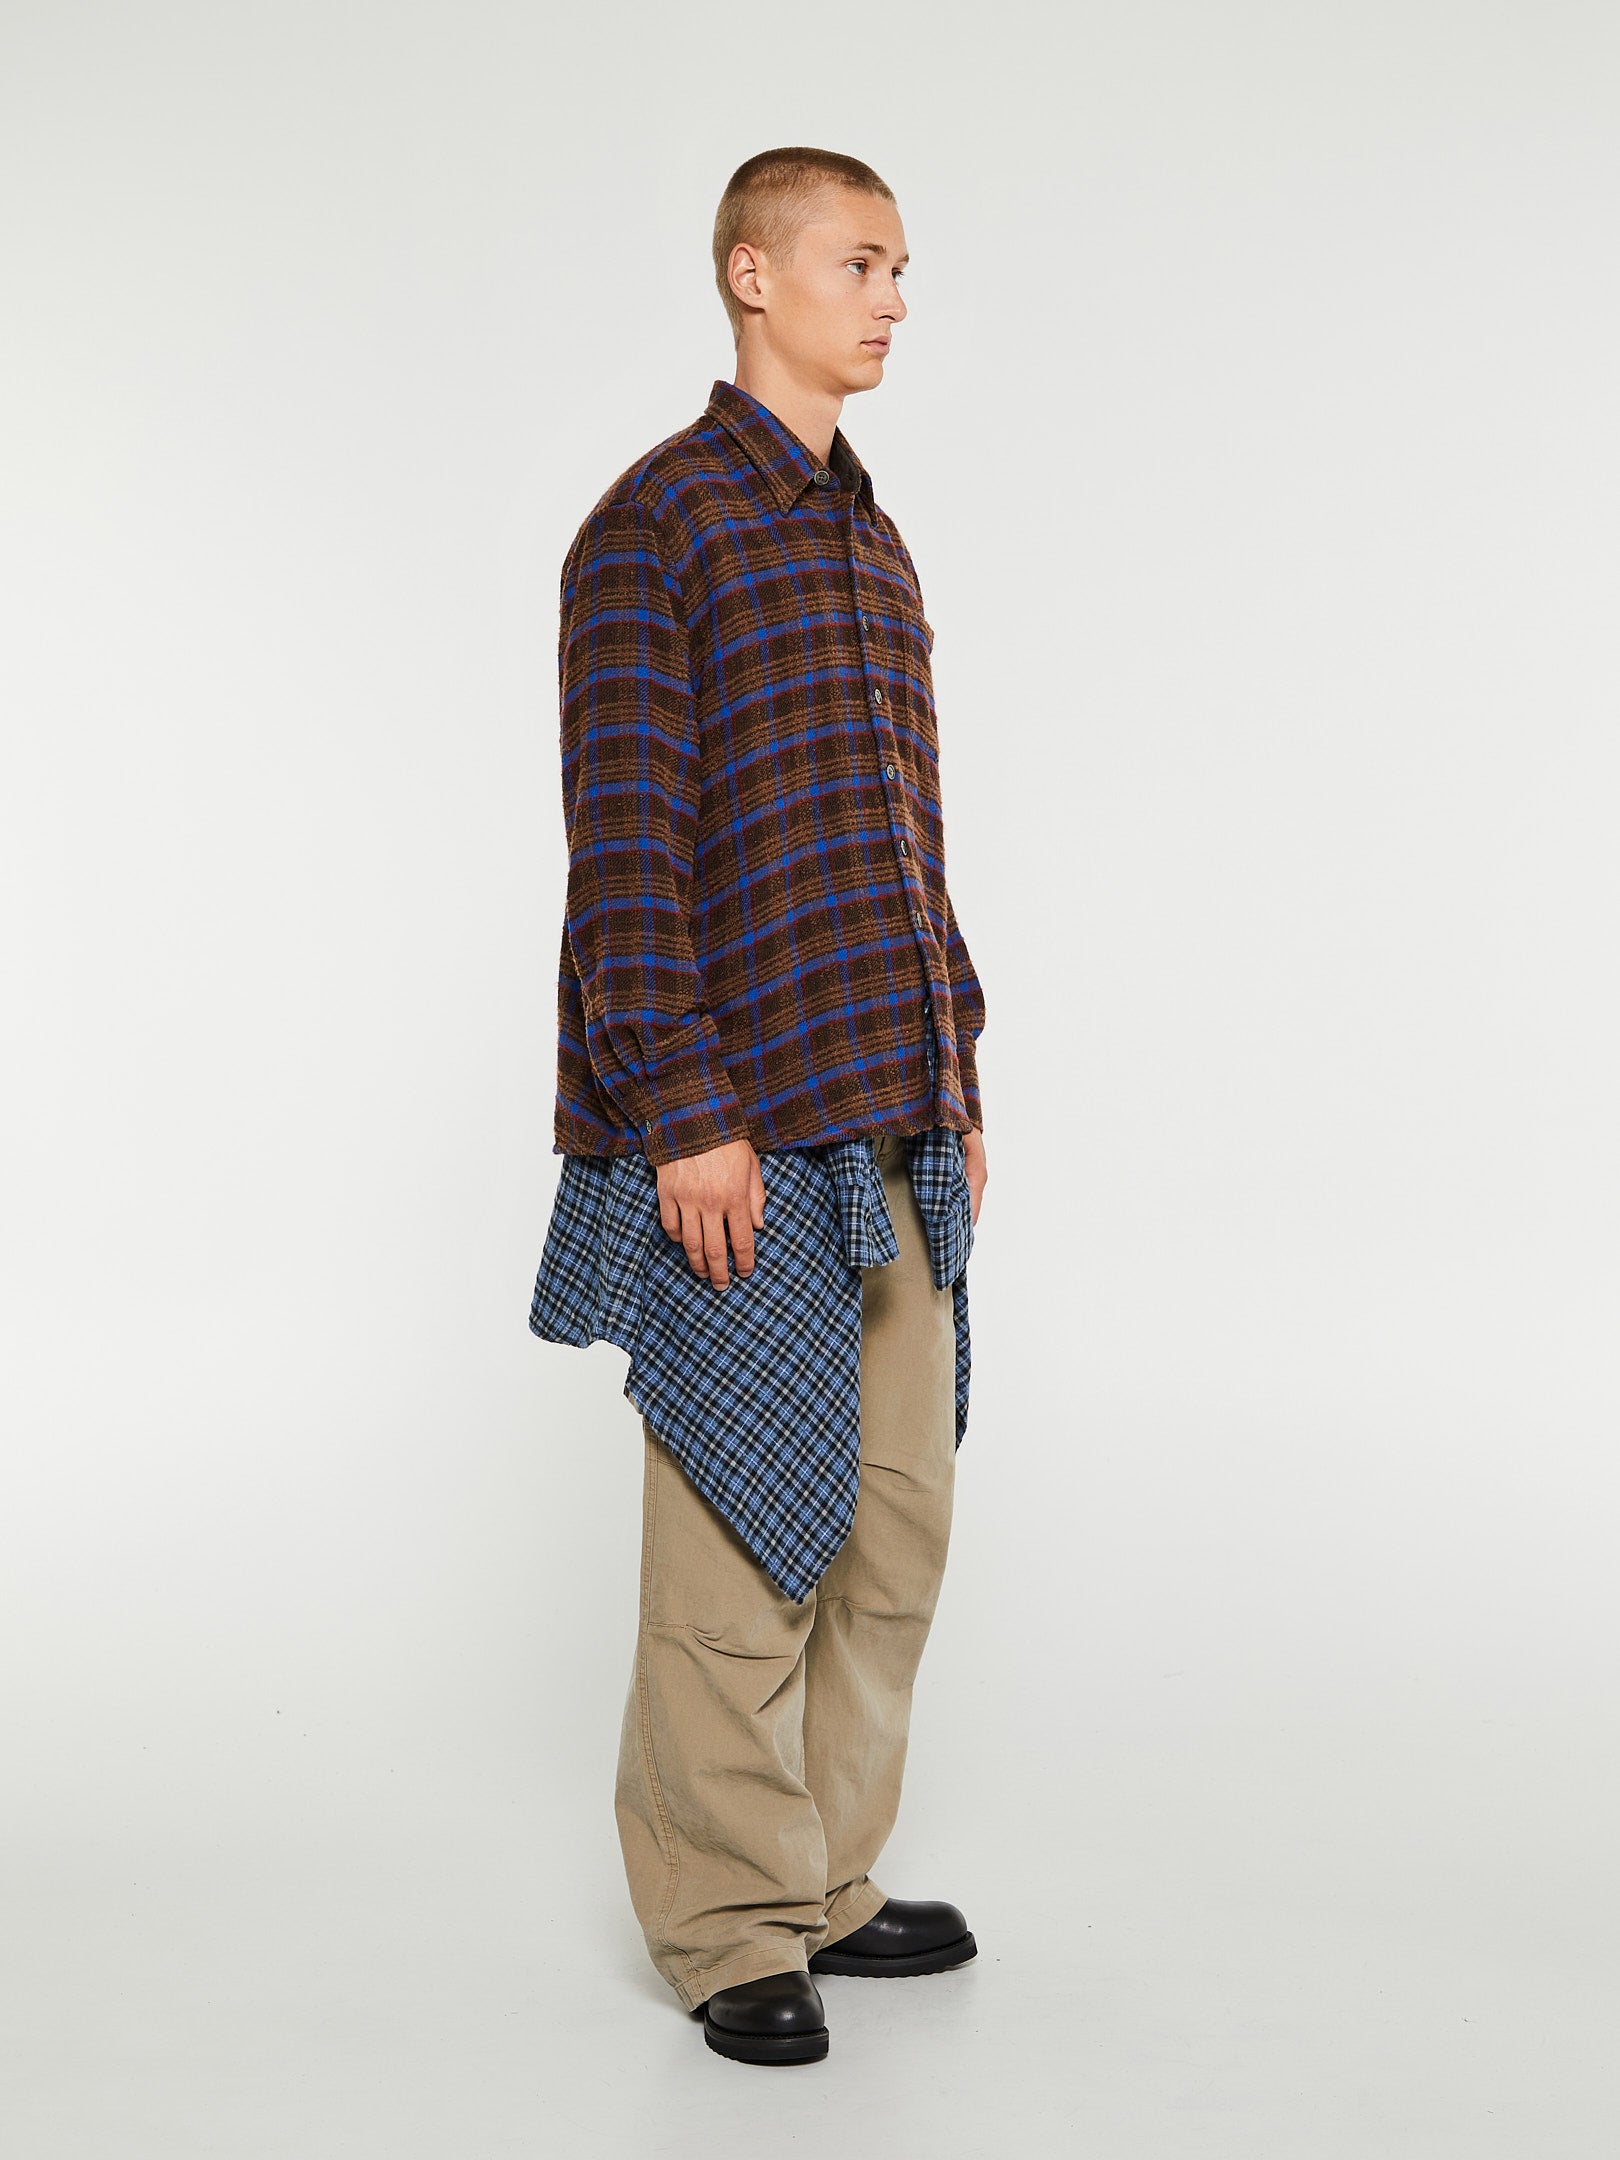 Mount Cargo Pants in Peafowl Canvas